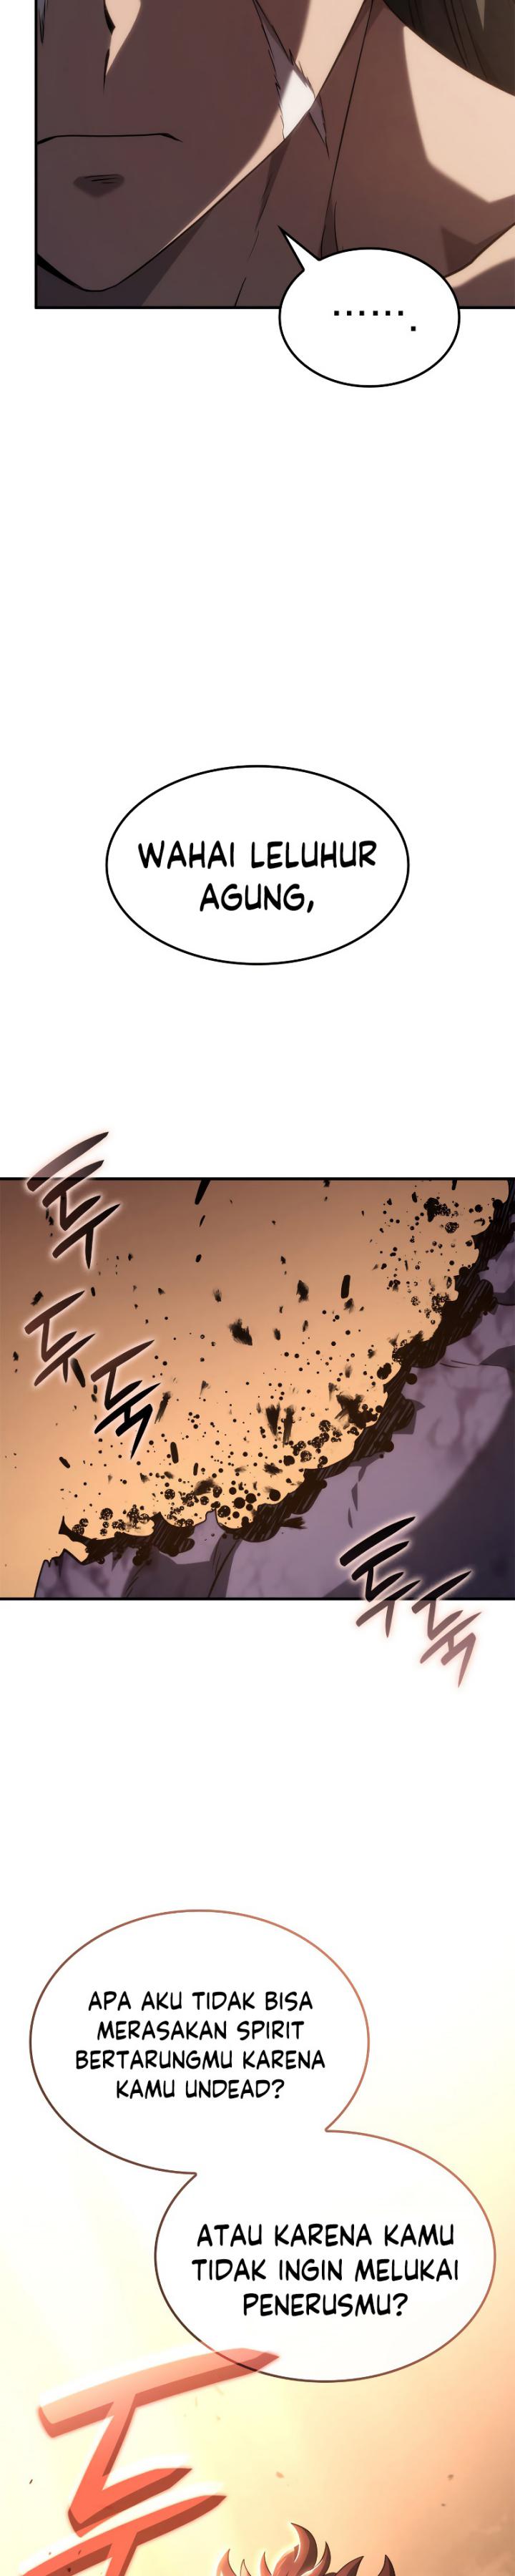 Revenge Of The Iron-blooded Sword Hound Chapter 54